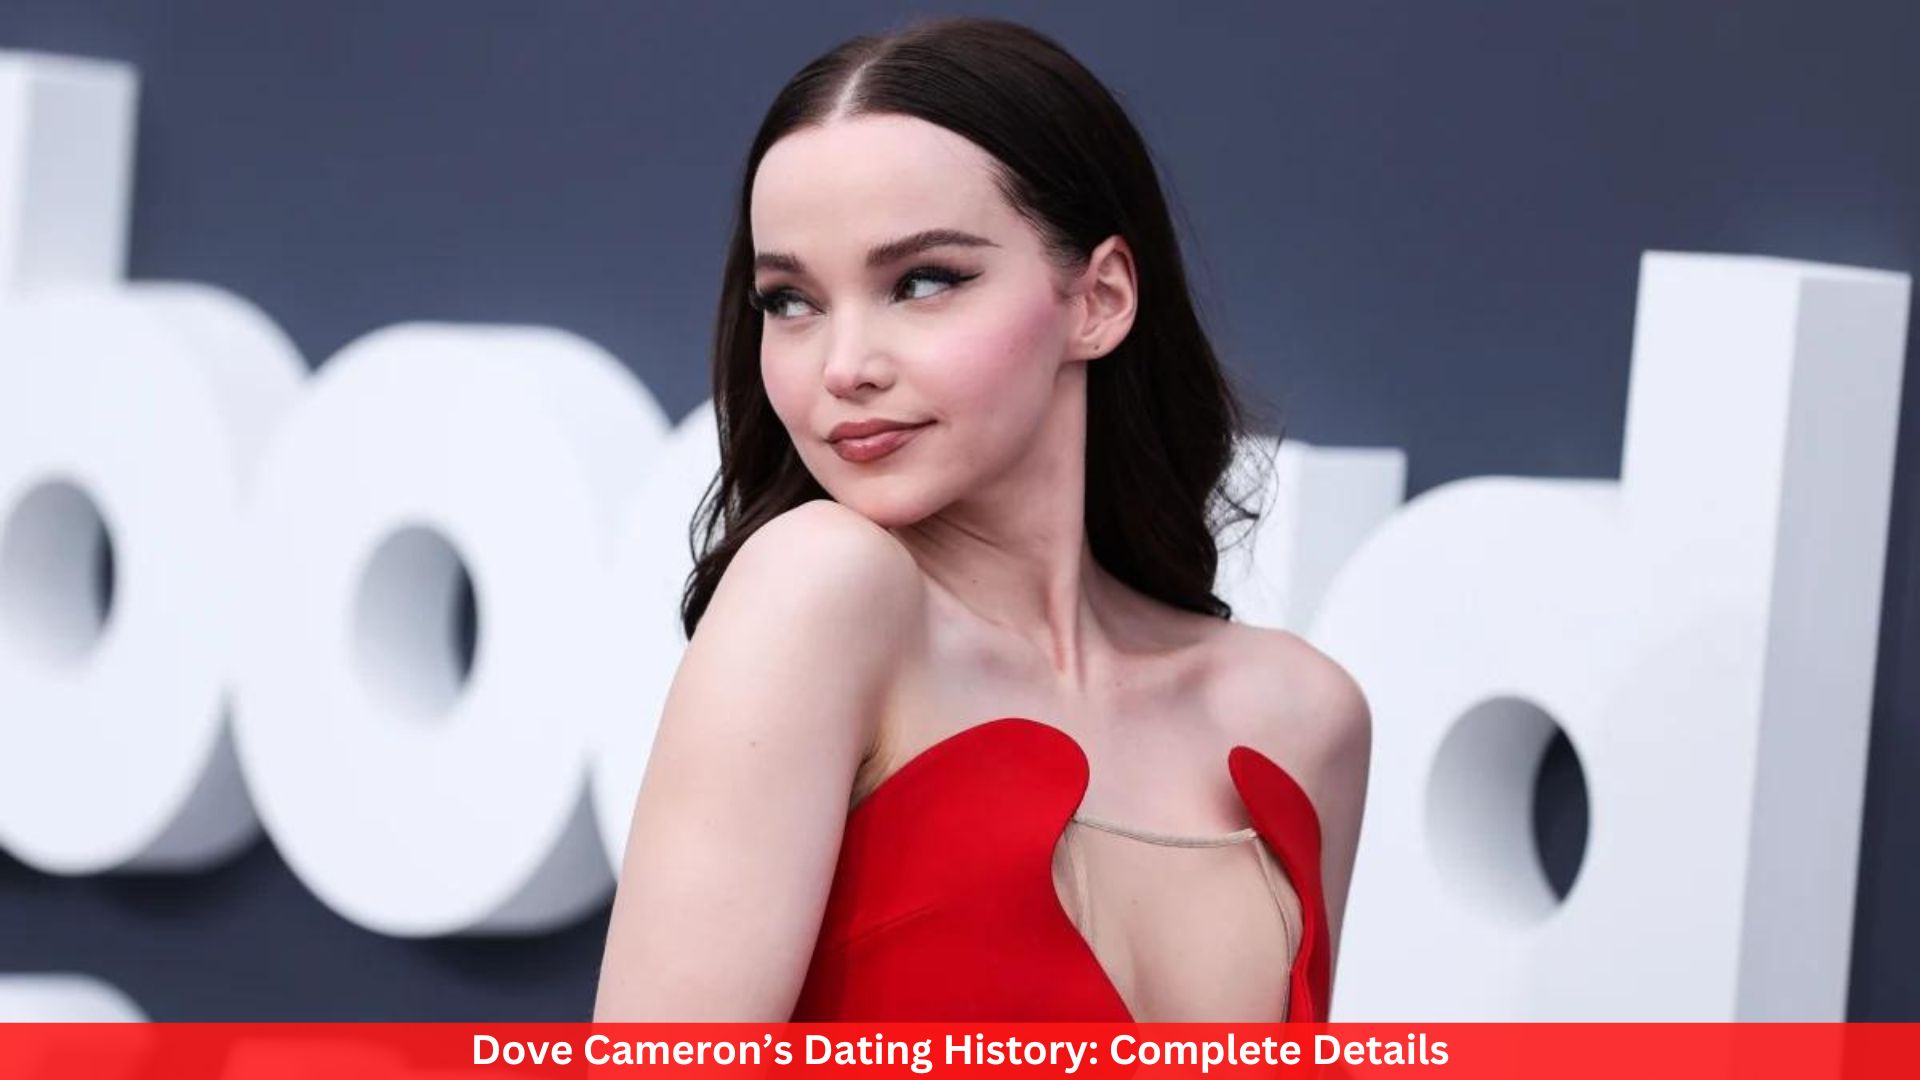 Dove Cameron’s Dating History: Complete Details